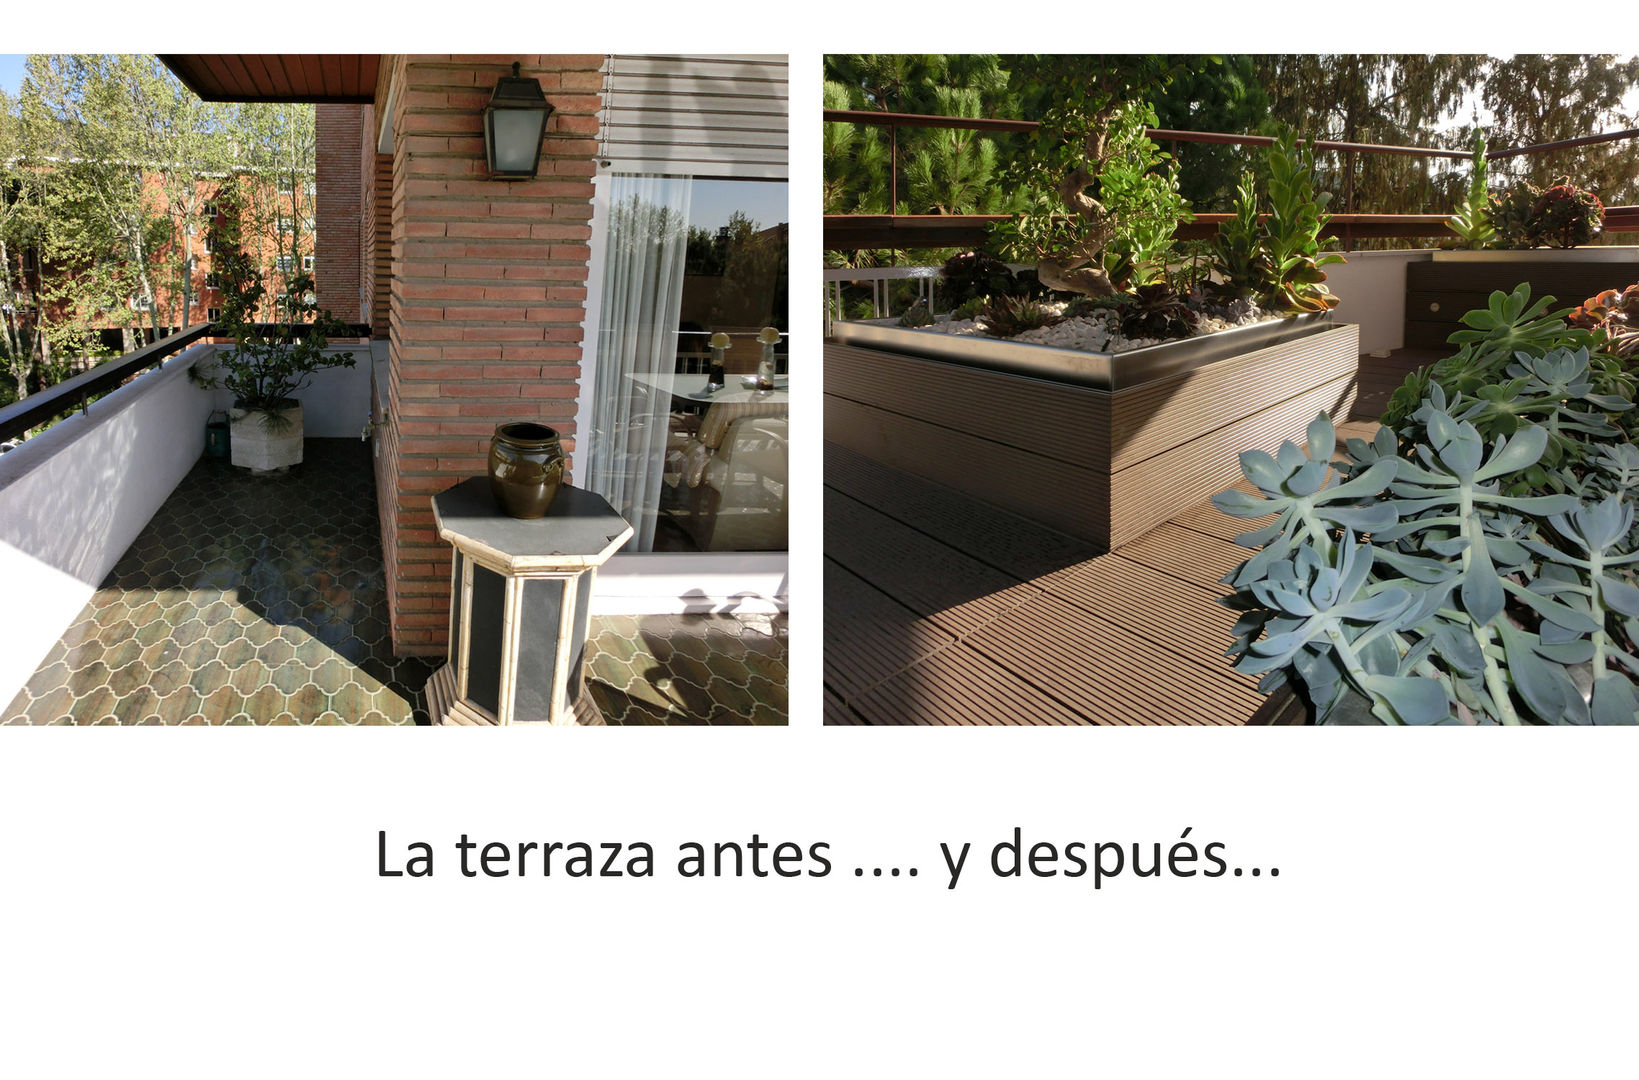 Terrace before and after Daifuku Designs Varandas, marquises e terraços minimalistas terrace,before and after